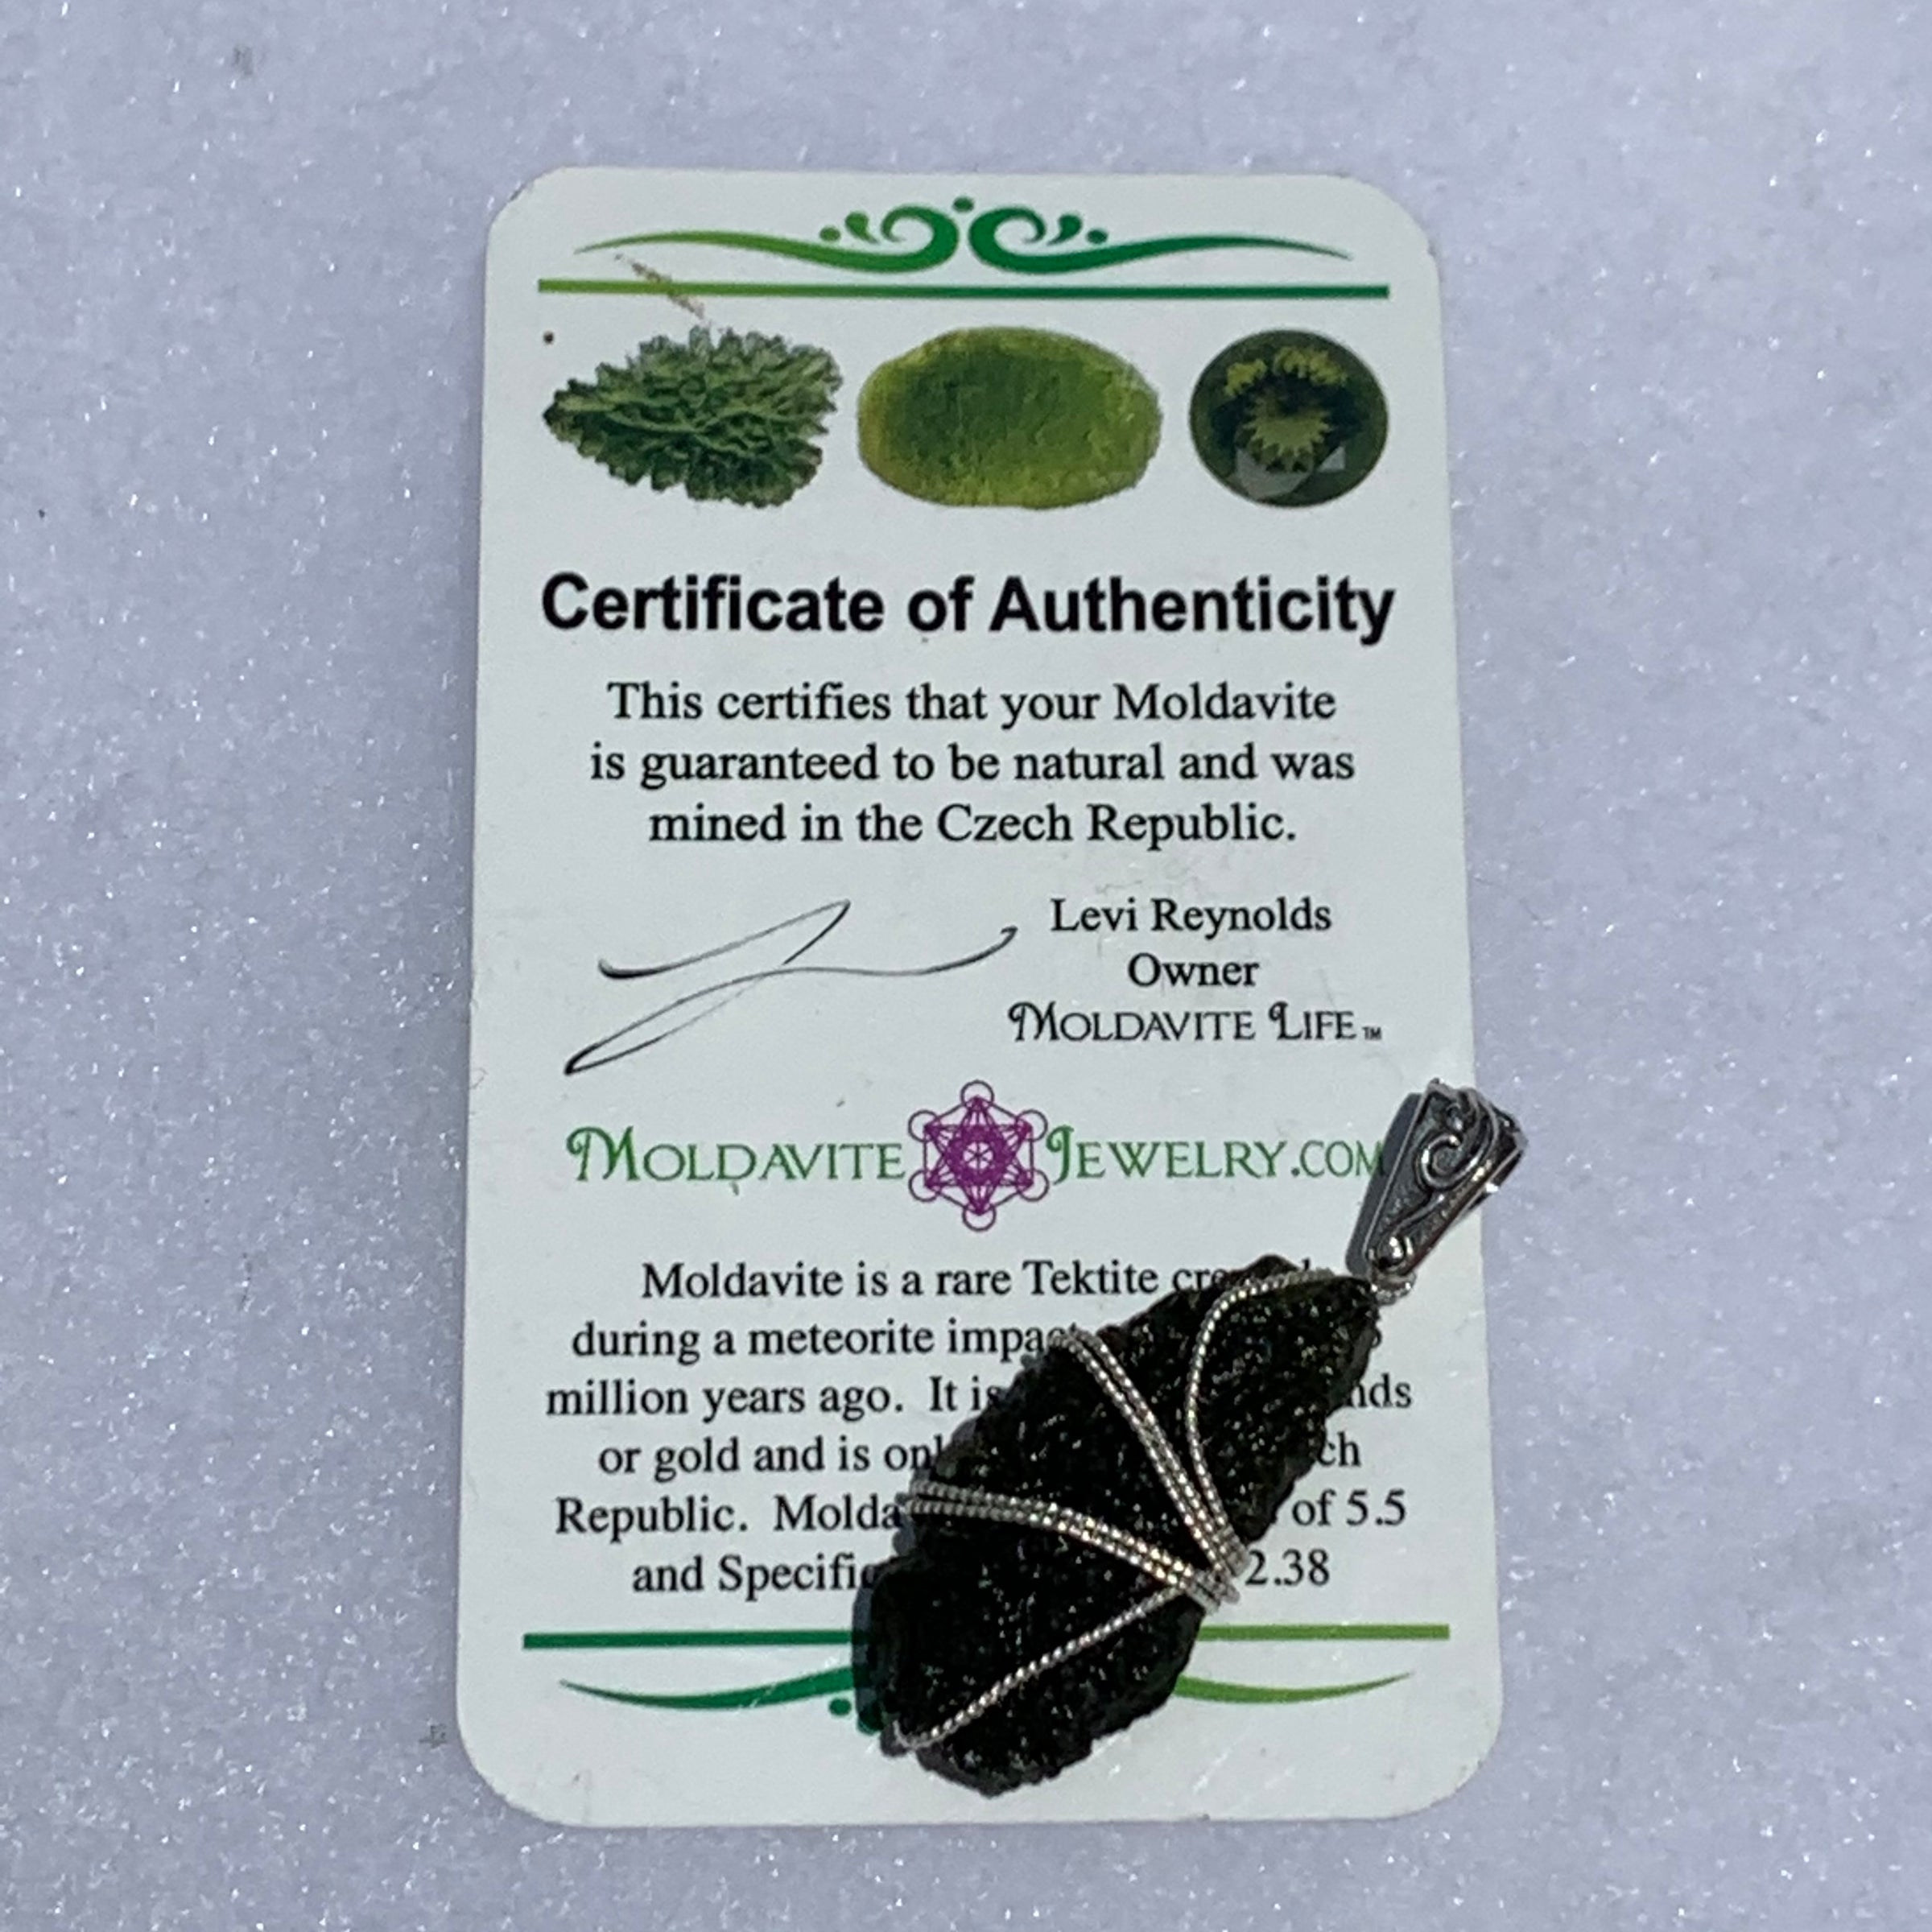 the moldavite pendant sits on the certificate of authenticity